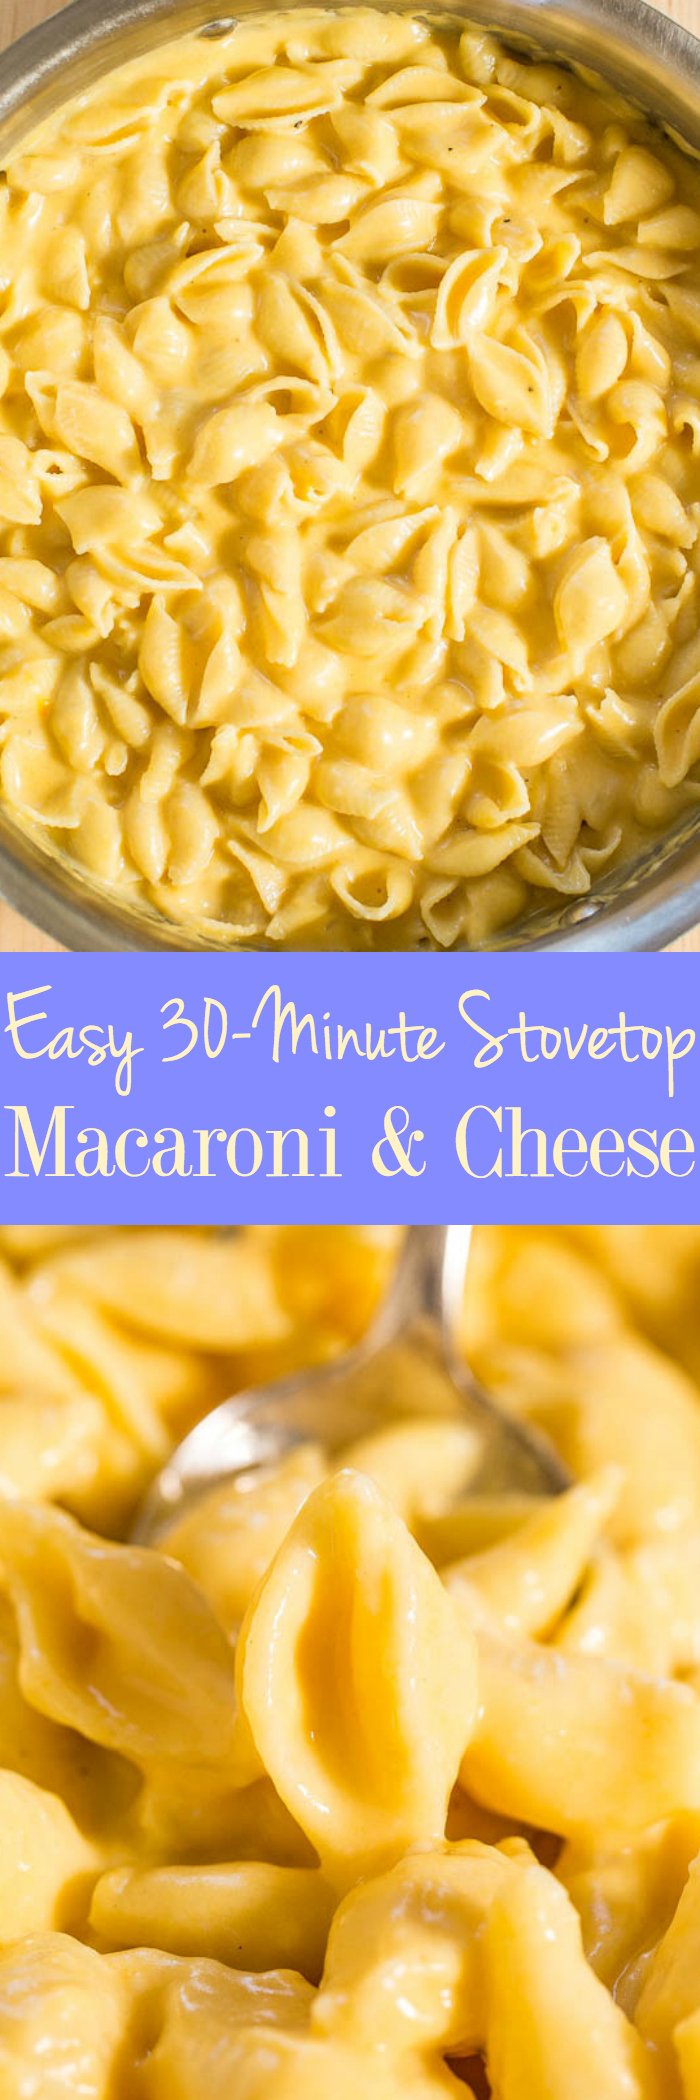 Creamy Stovetop Mac and Cheese — This is a no-frills stovetop mac and cheese recipe the whole family will love. It’s easy, ready in 30 minutes, and uses real cheese!